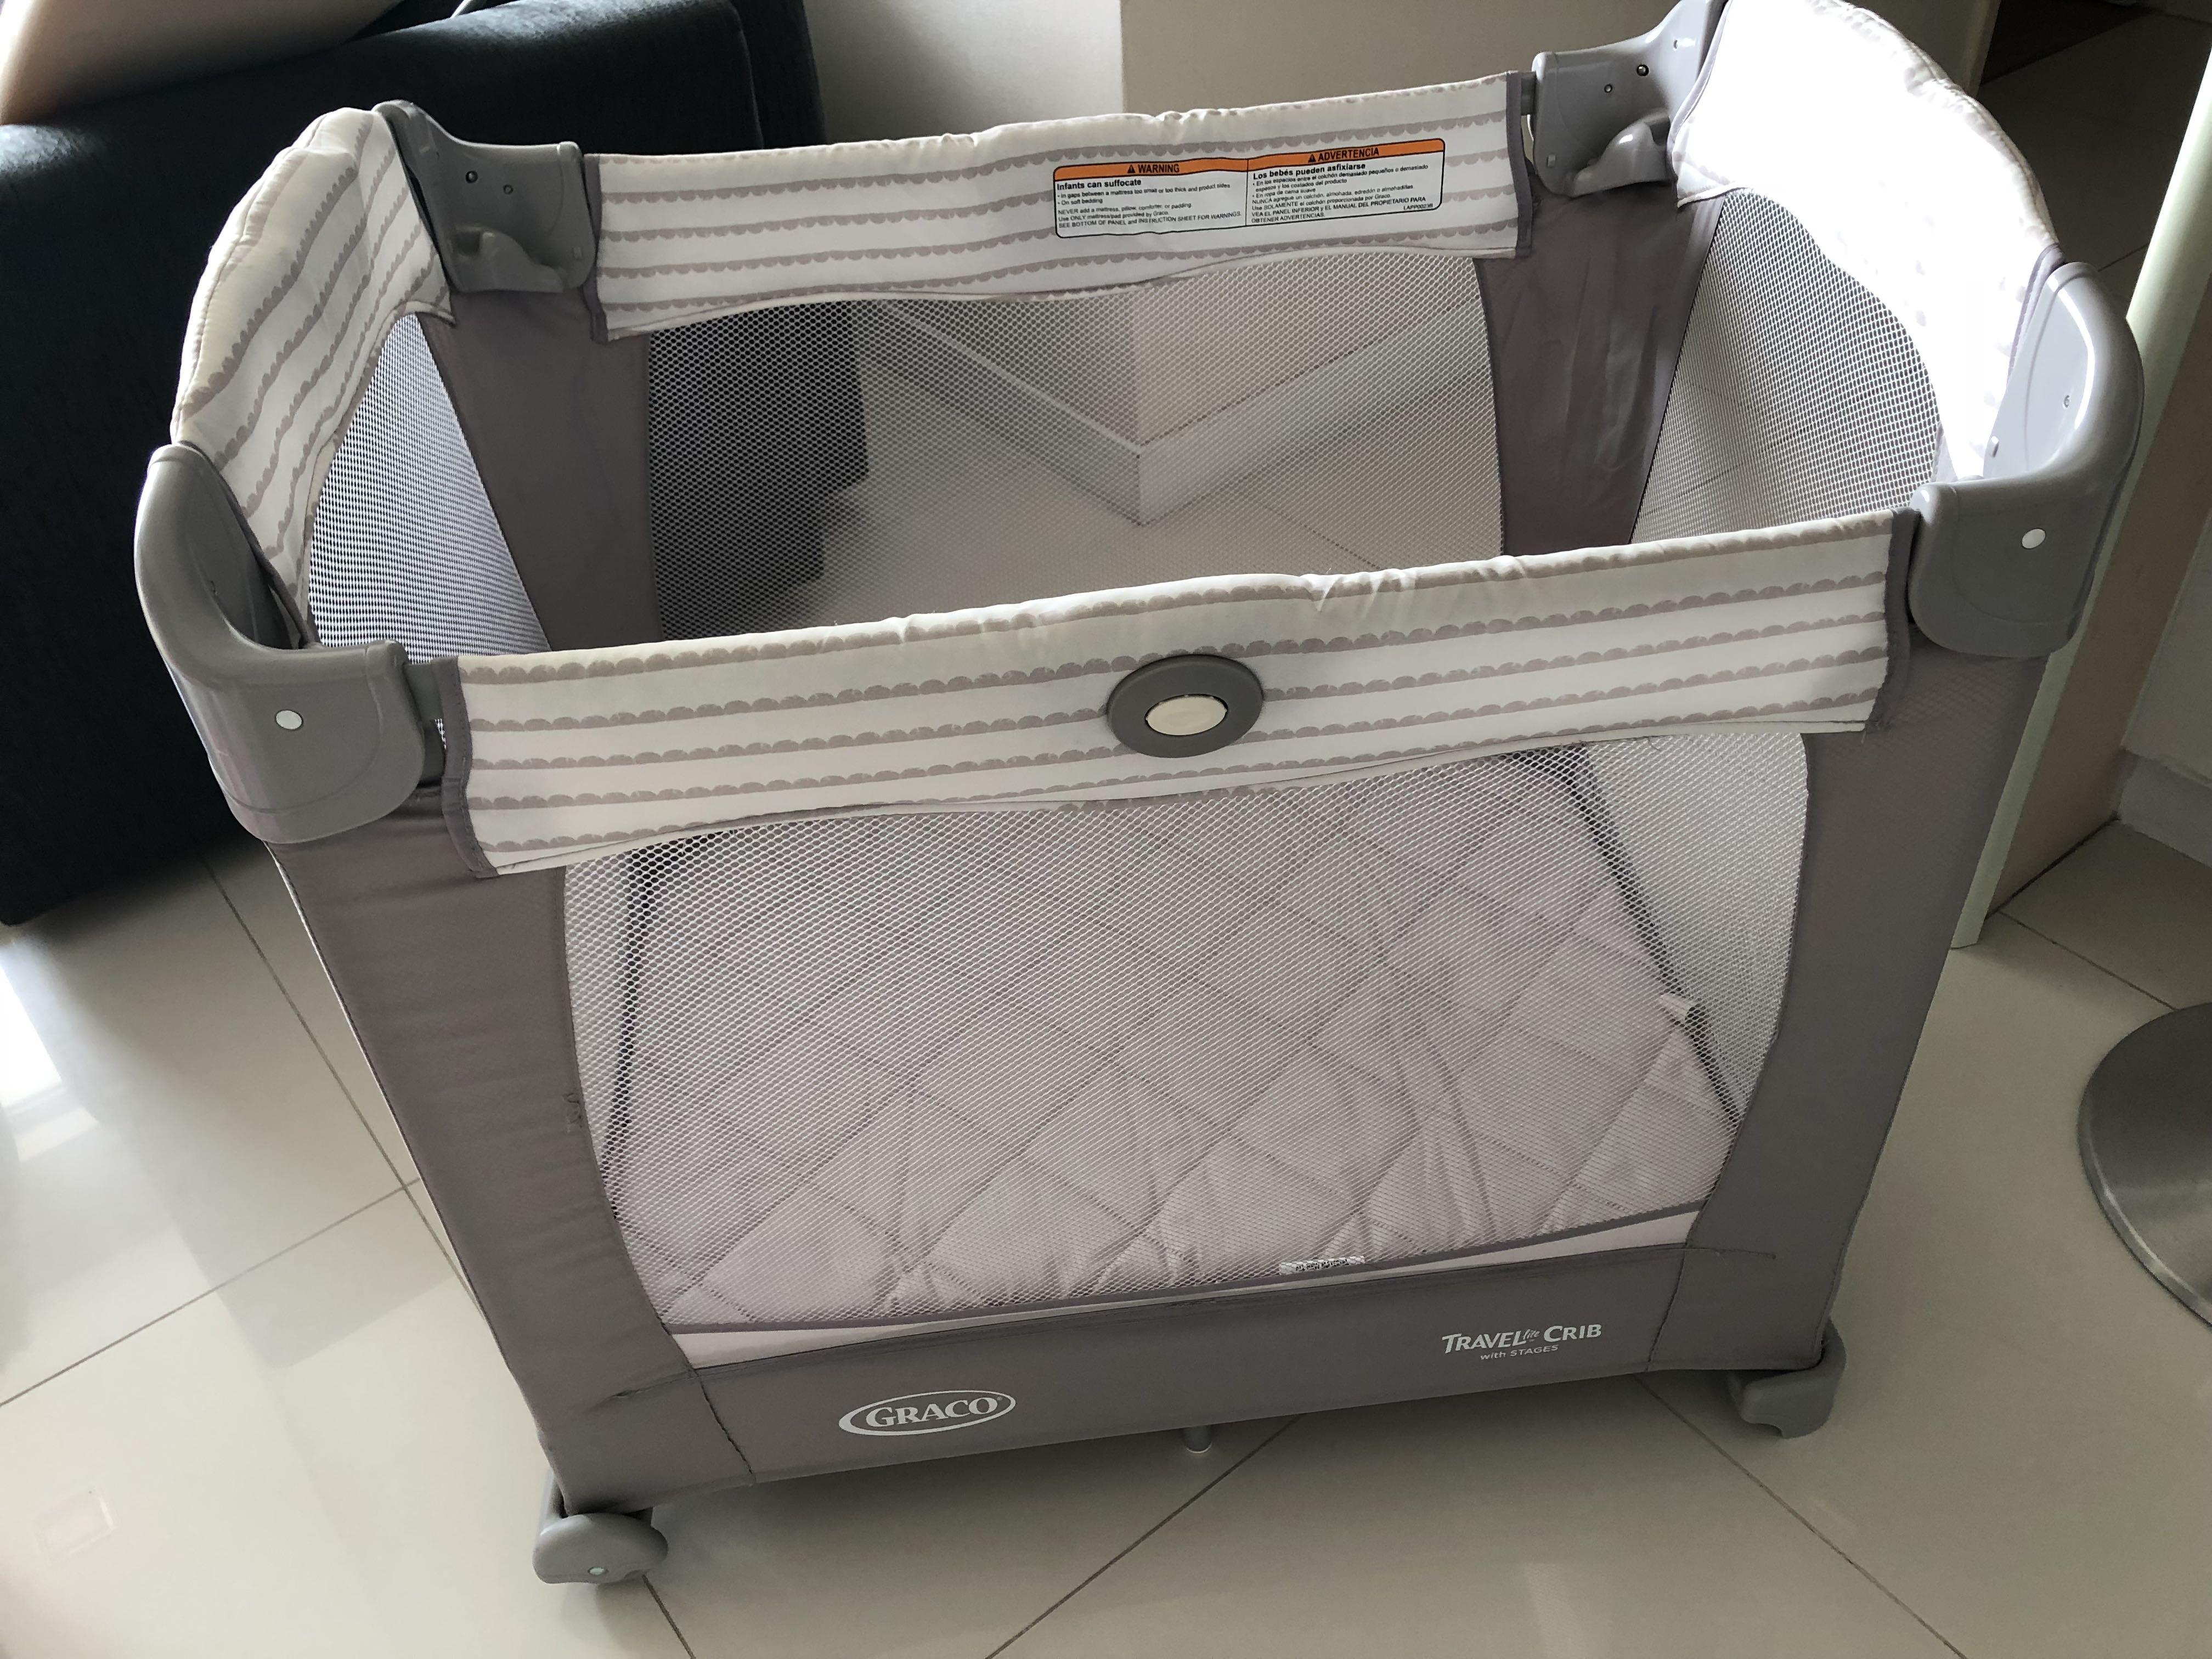 travel lite travel cot and playpen